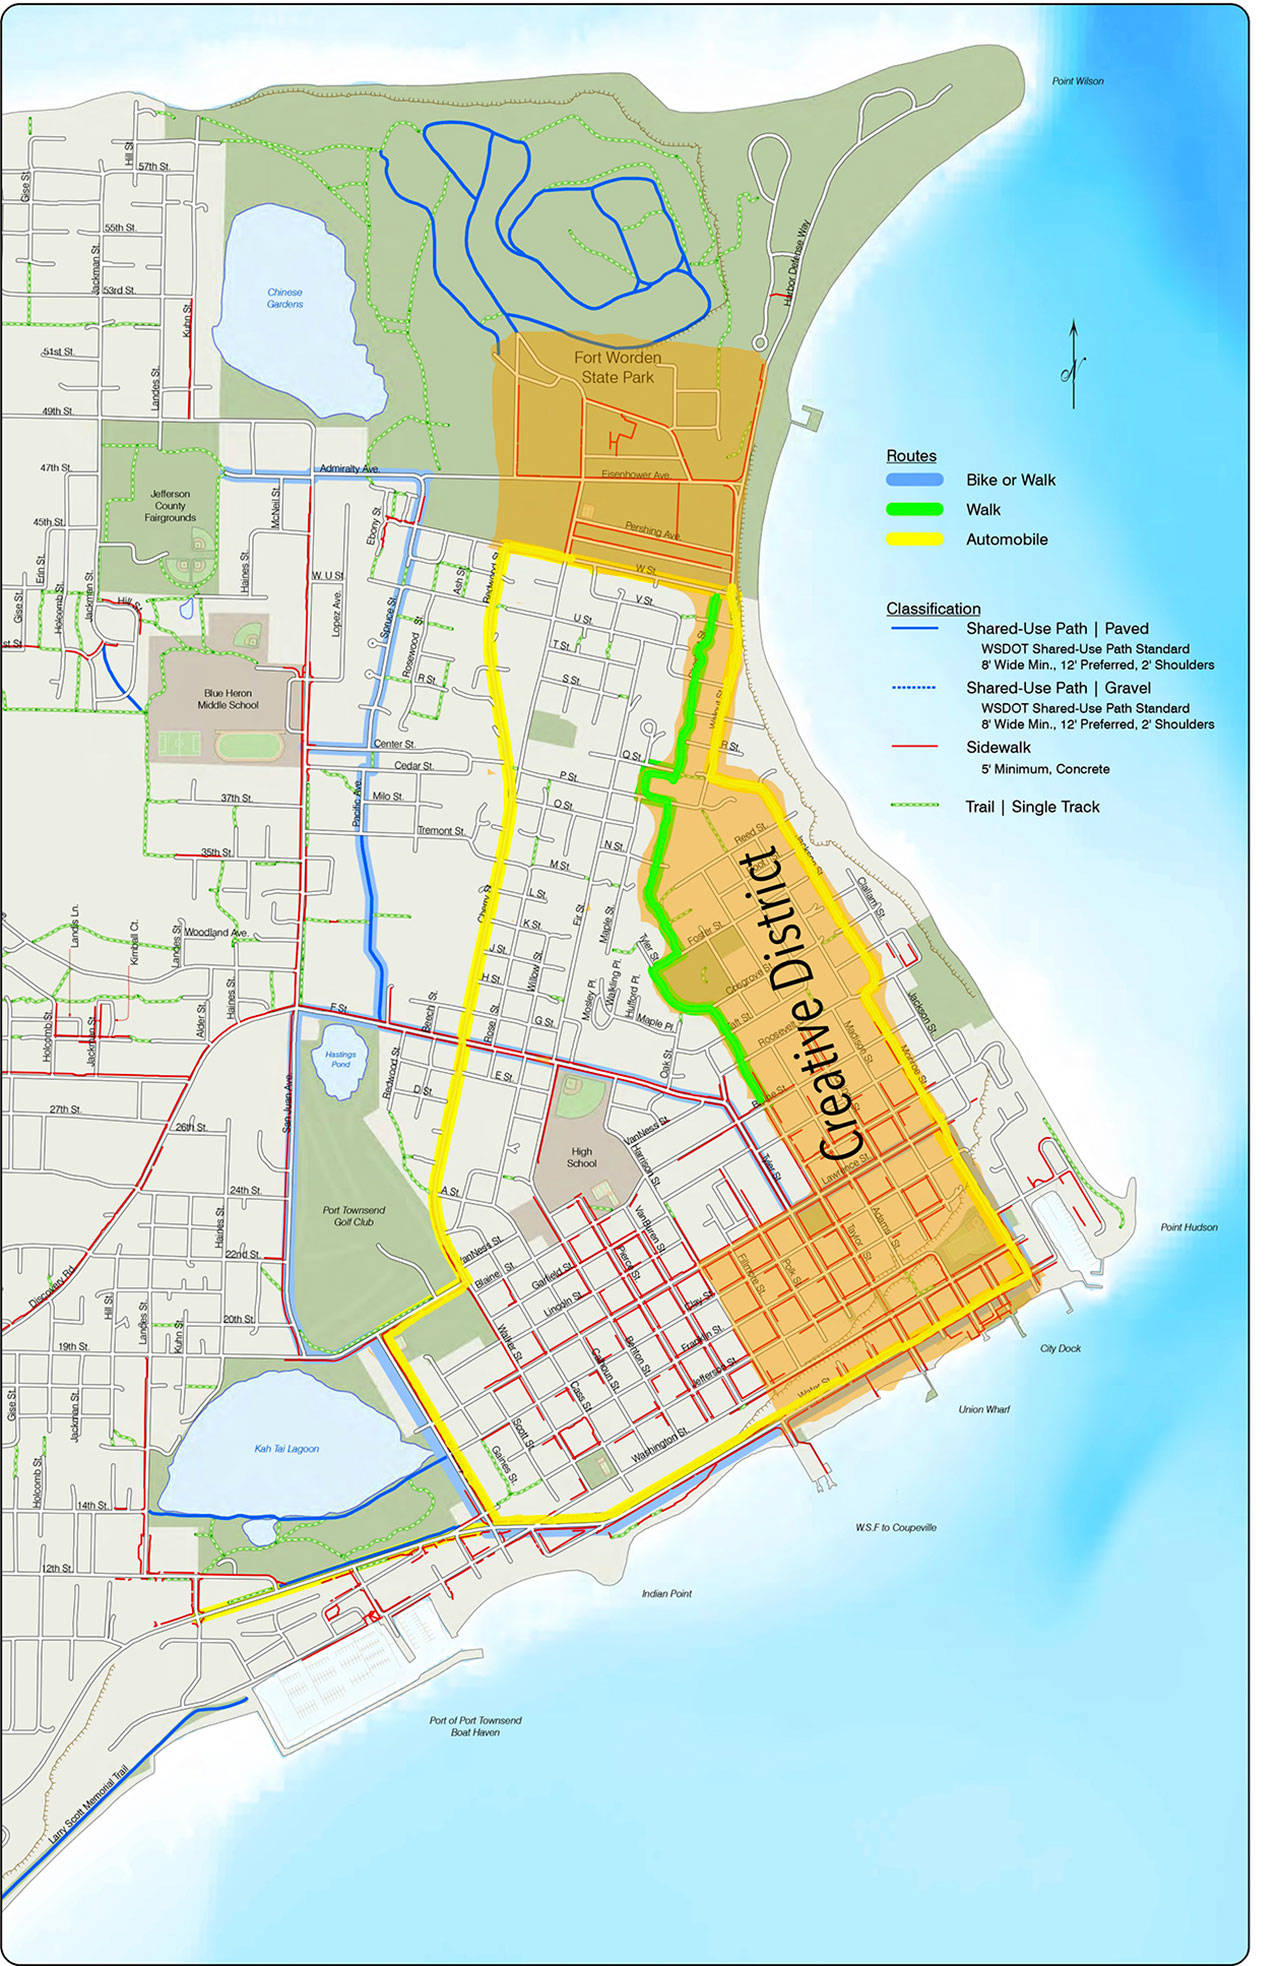 This map shows the Port Townsend Creative District in orange along with plans for walking, biking and driving tour routes. Kris Nelson, chair of the Port Townsend Creative District subcommittee, said this route plan was based on an initial project budget of $80,000 and will have to be scaled back to fit within the current $49,000 budget.